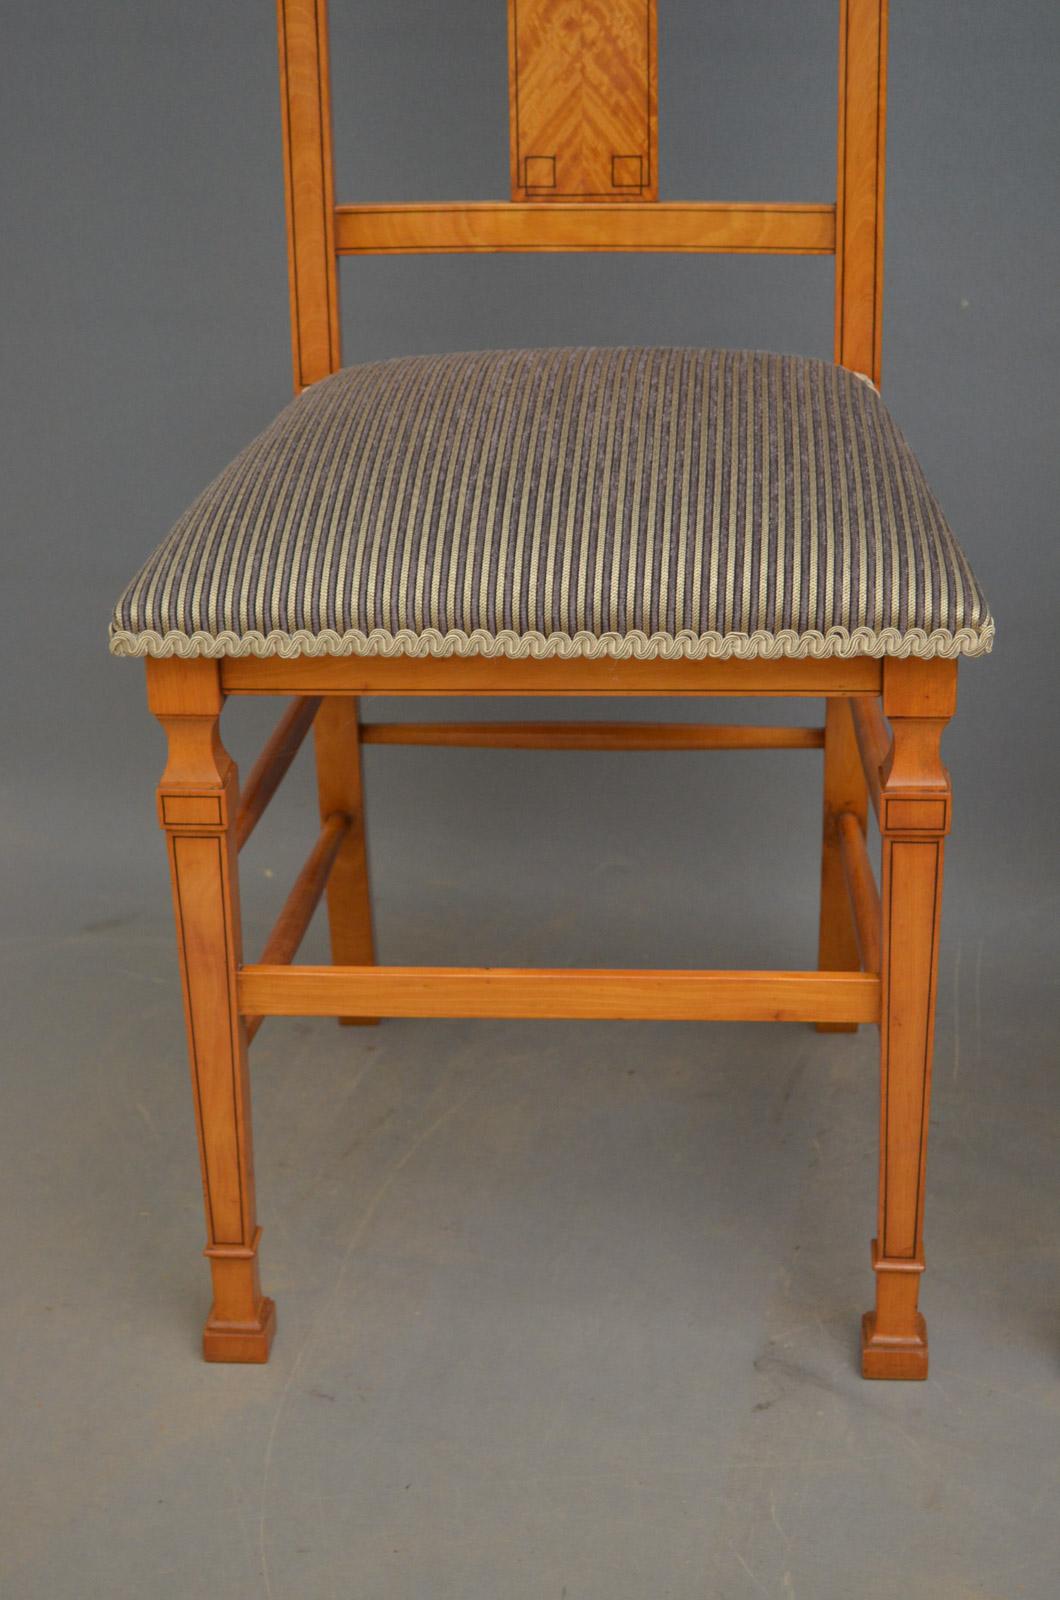 Early 20th Century Shapland & Petter Satinwood Dressing Table Chair